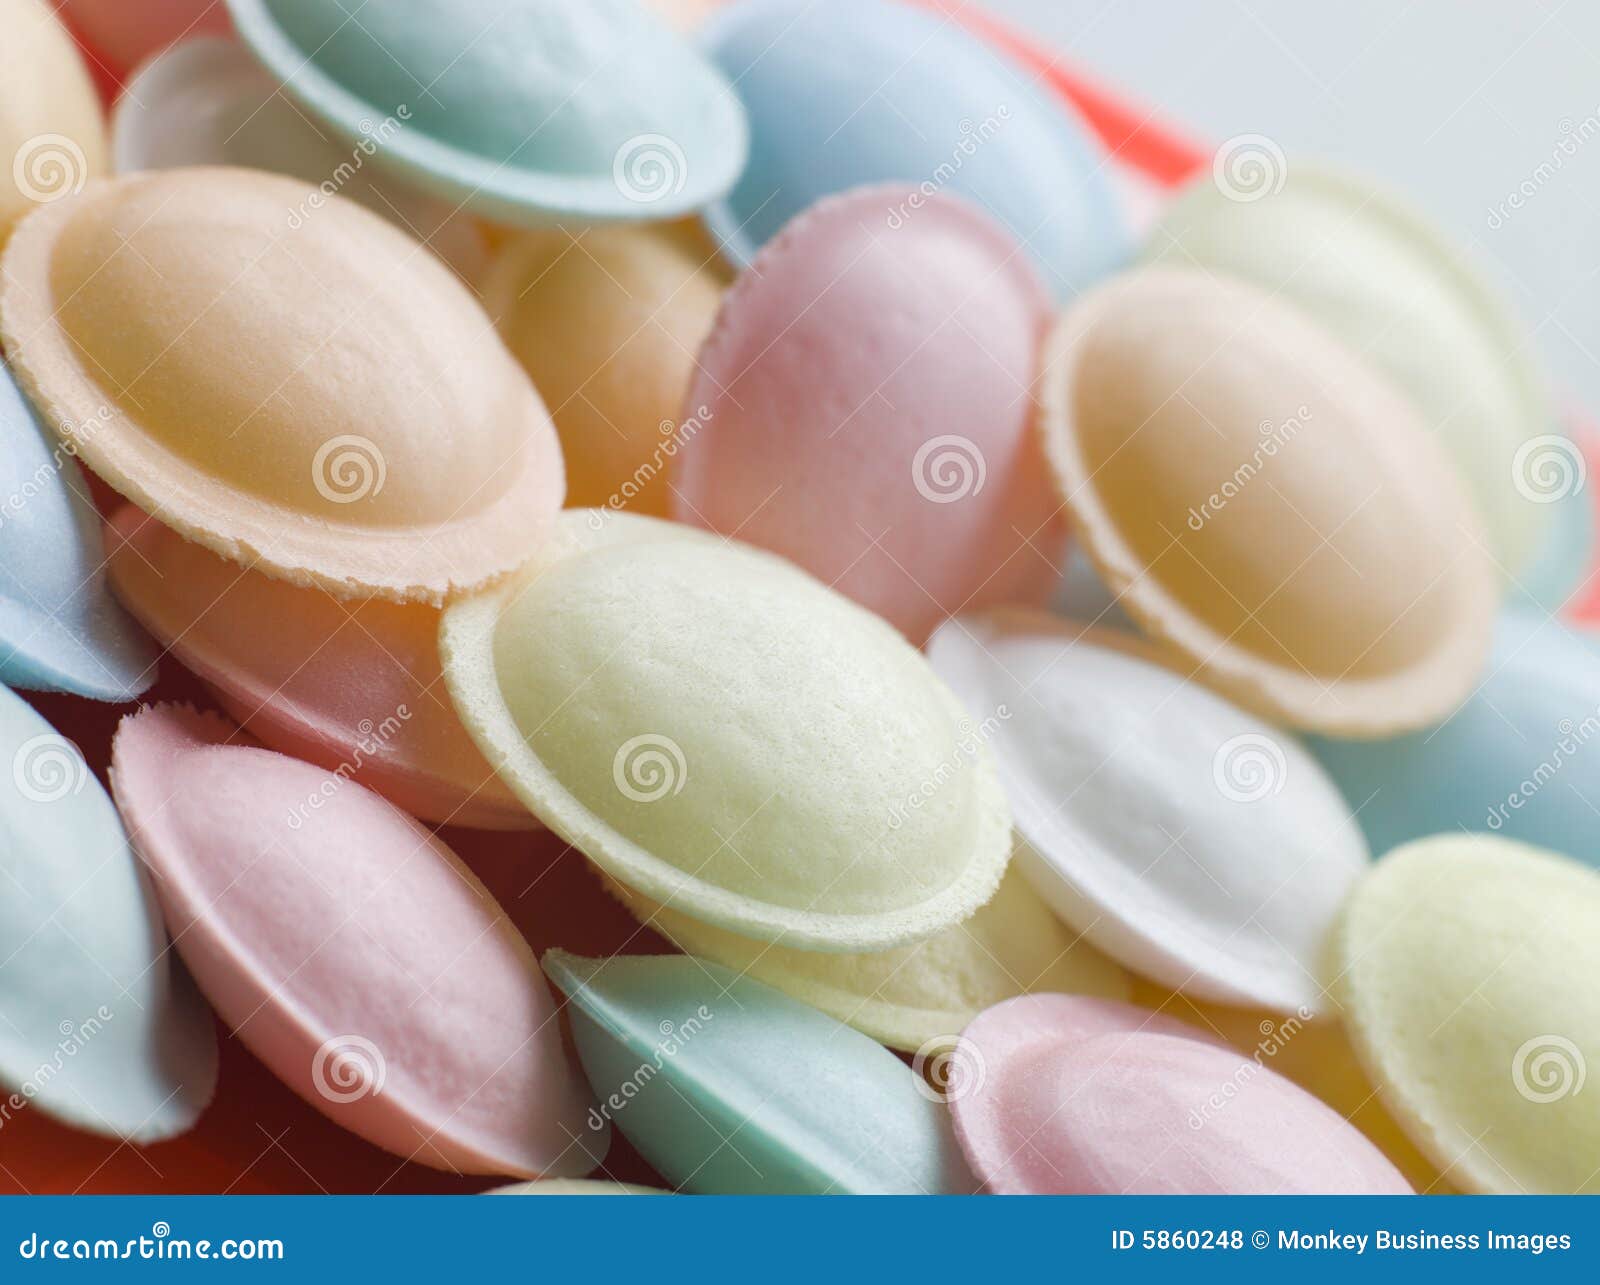 flying saucers sweets